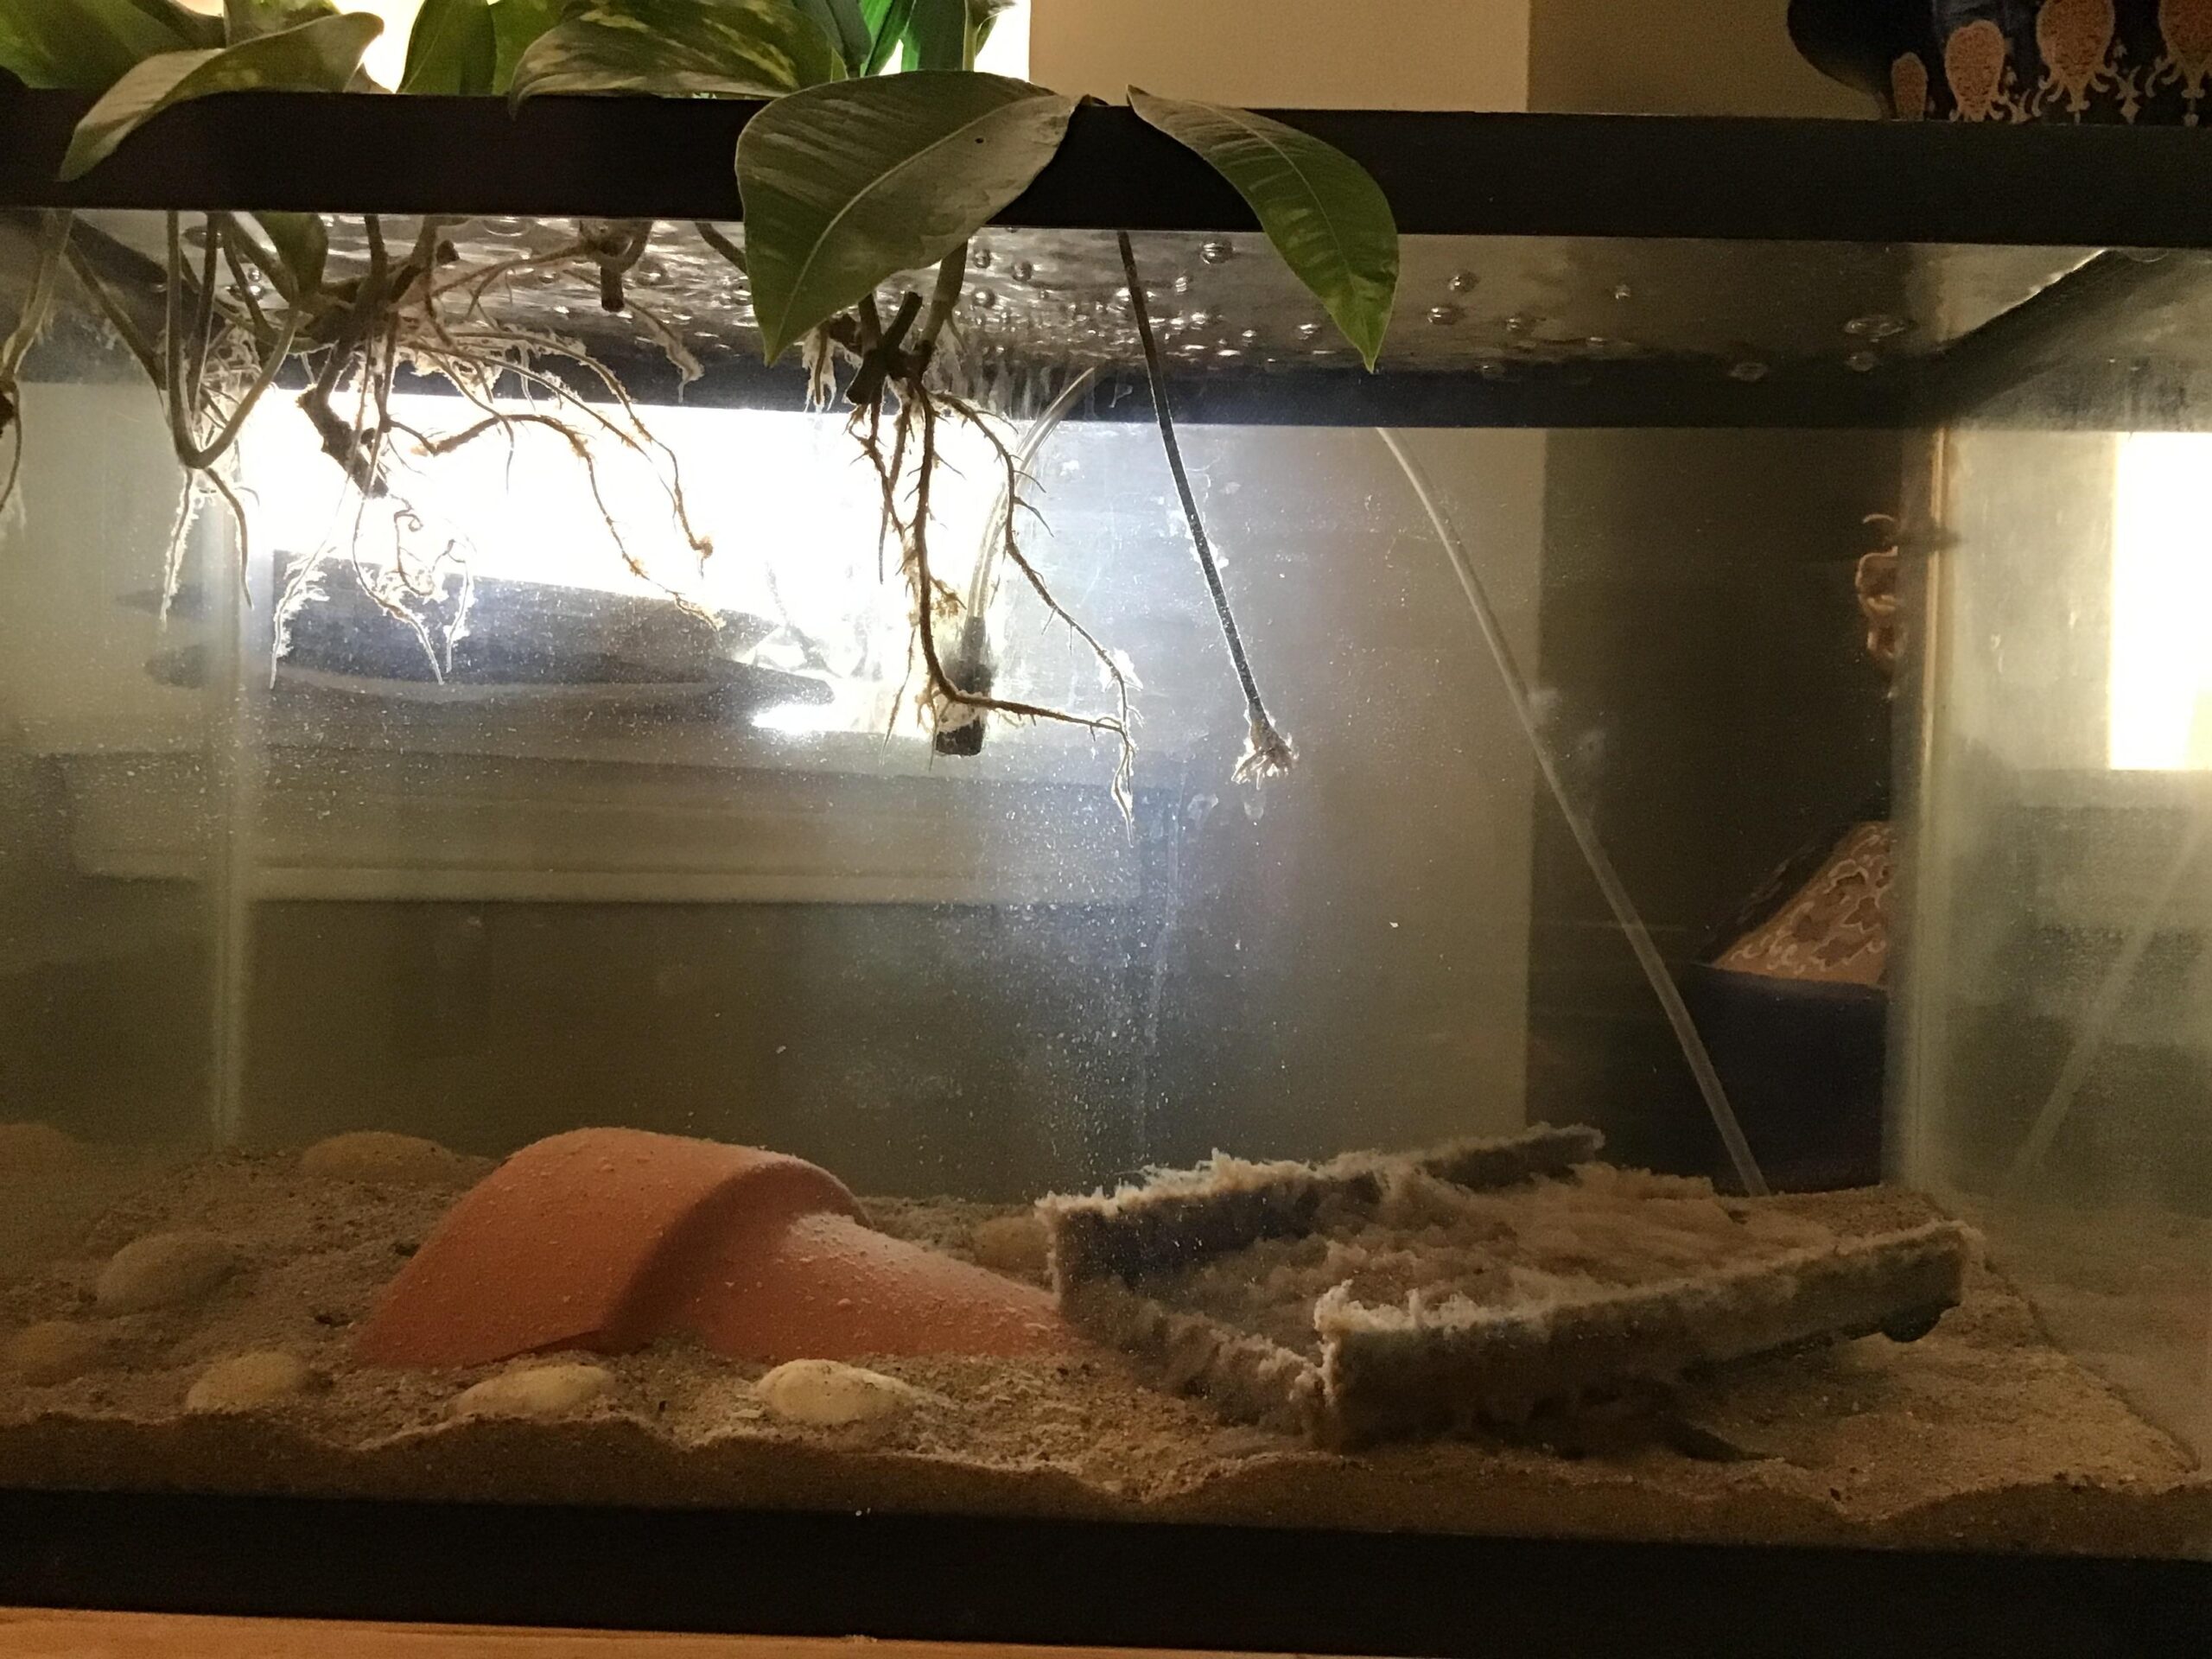 https://aquariumia.com/how-to-know-if-tank-is-cycled-without-test/